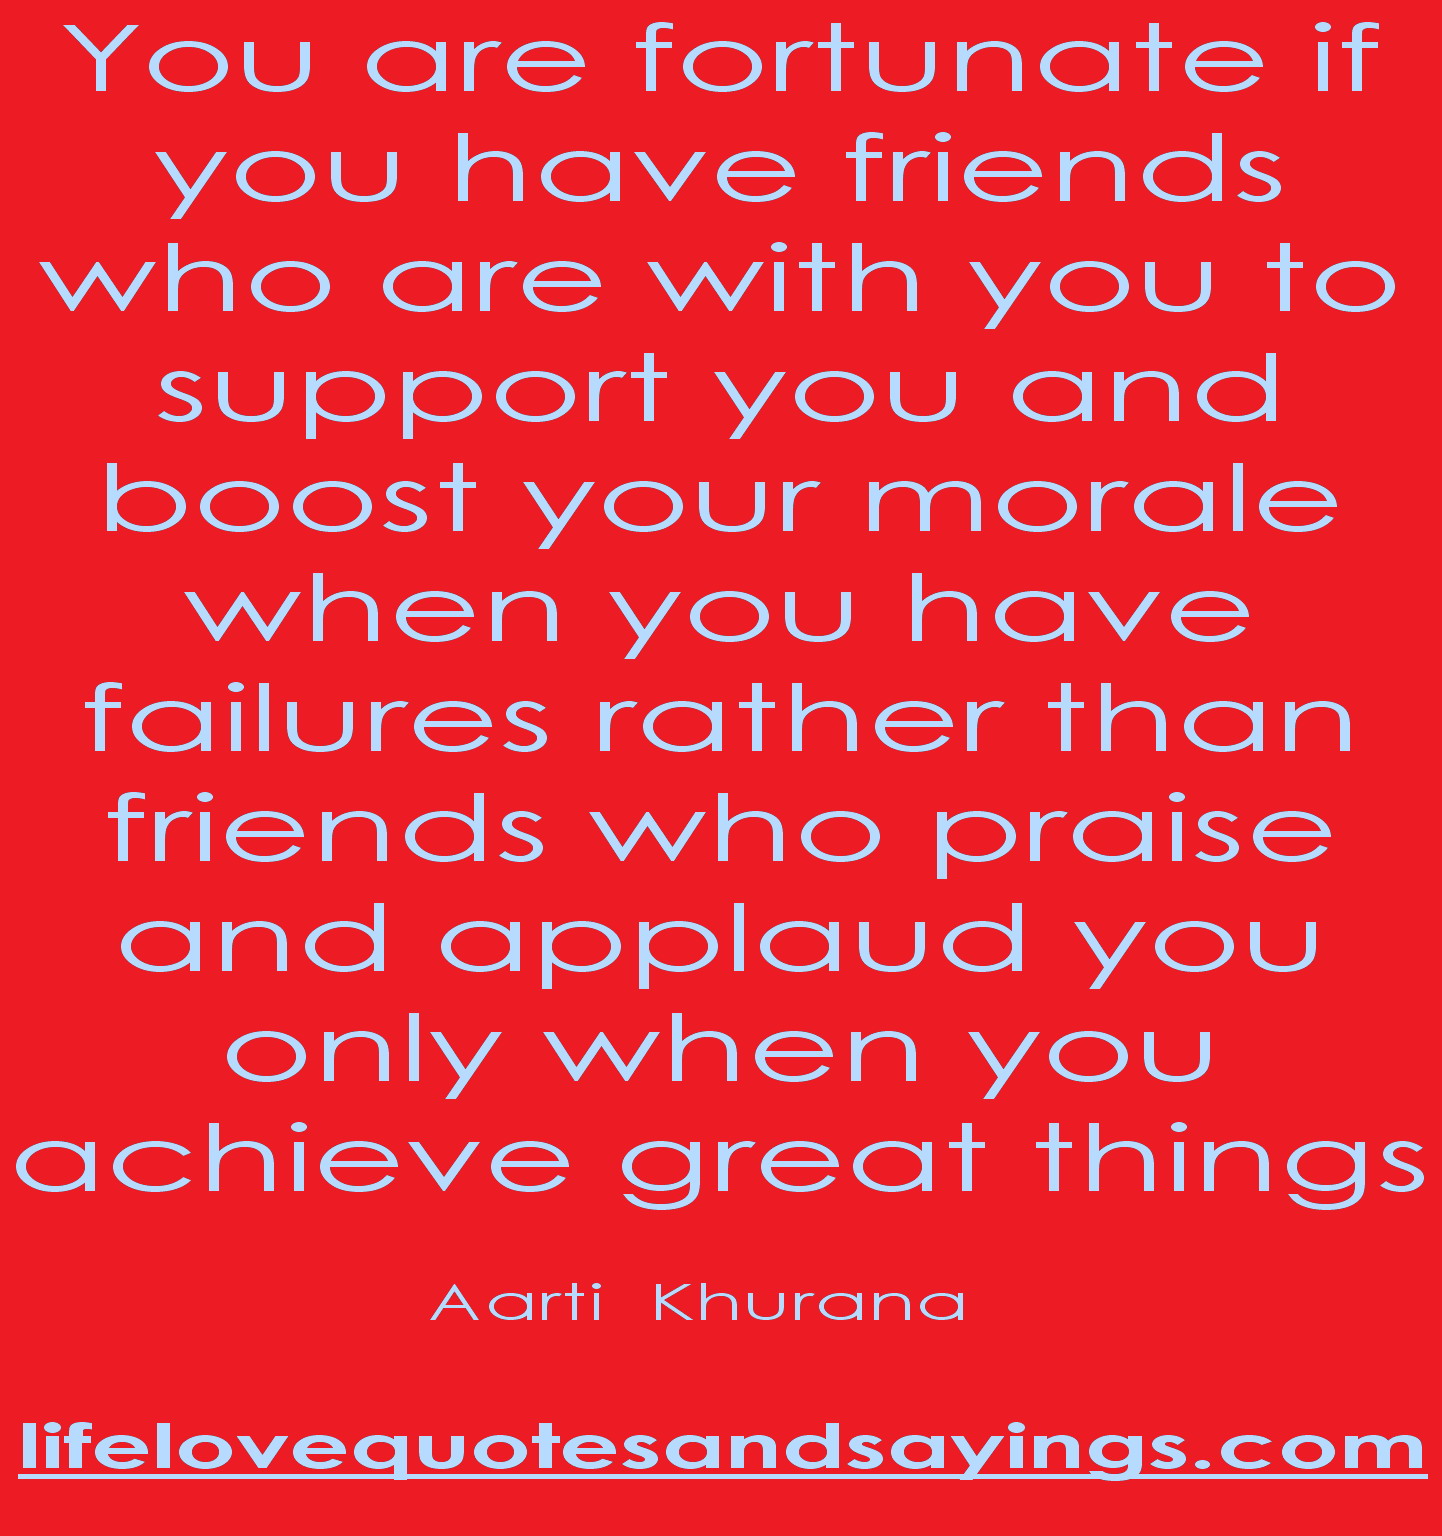 Quotes About Supportive Friends. QuotesGram